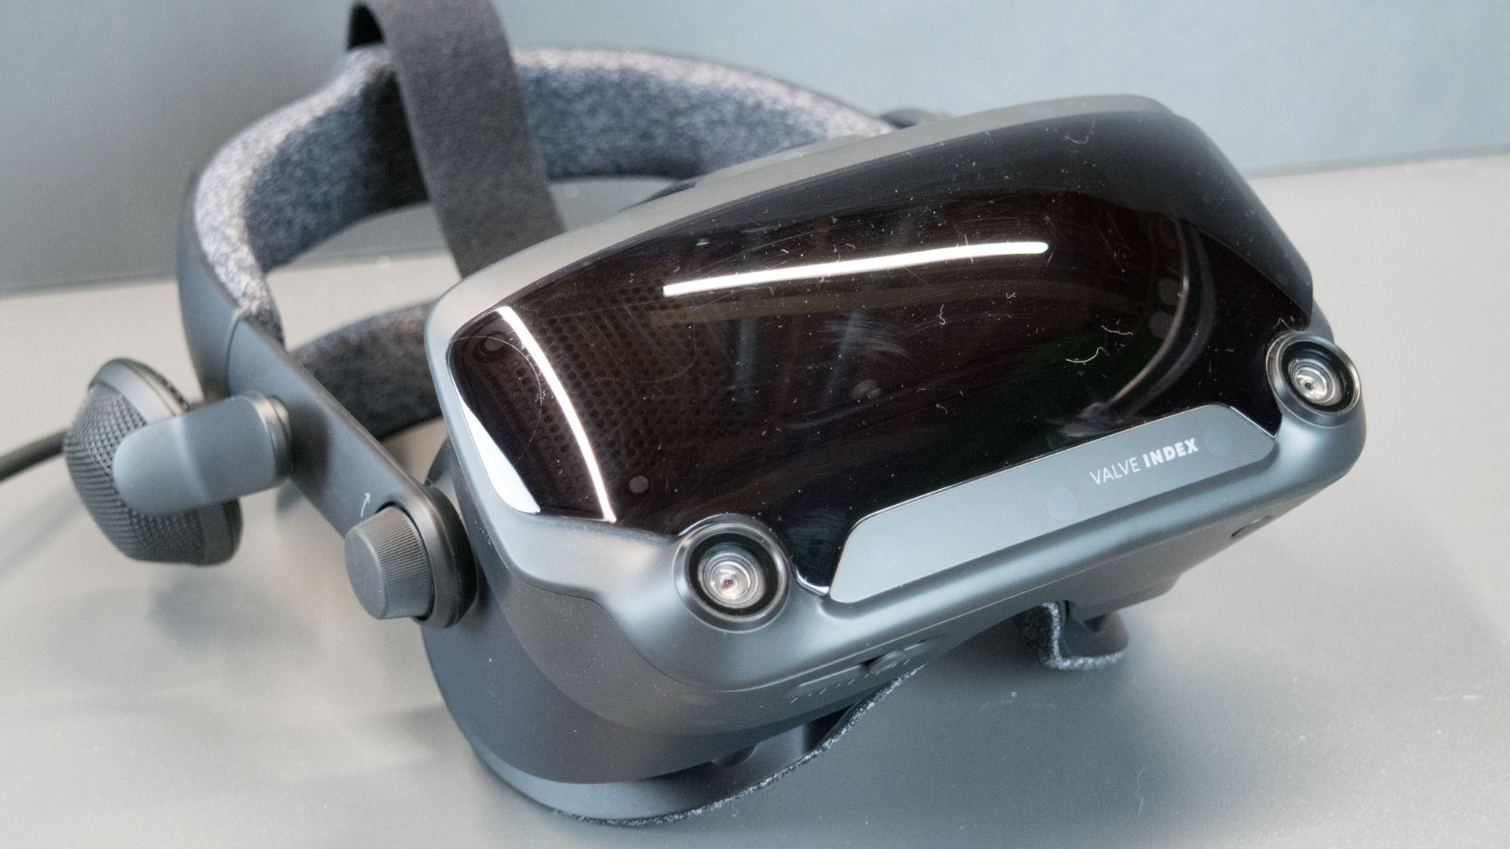 Valve's Index headset is sold out and VR 'Half-Life' isn't even here yet